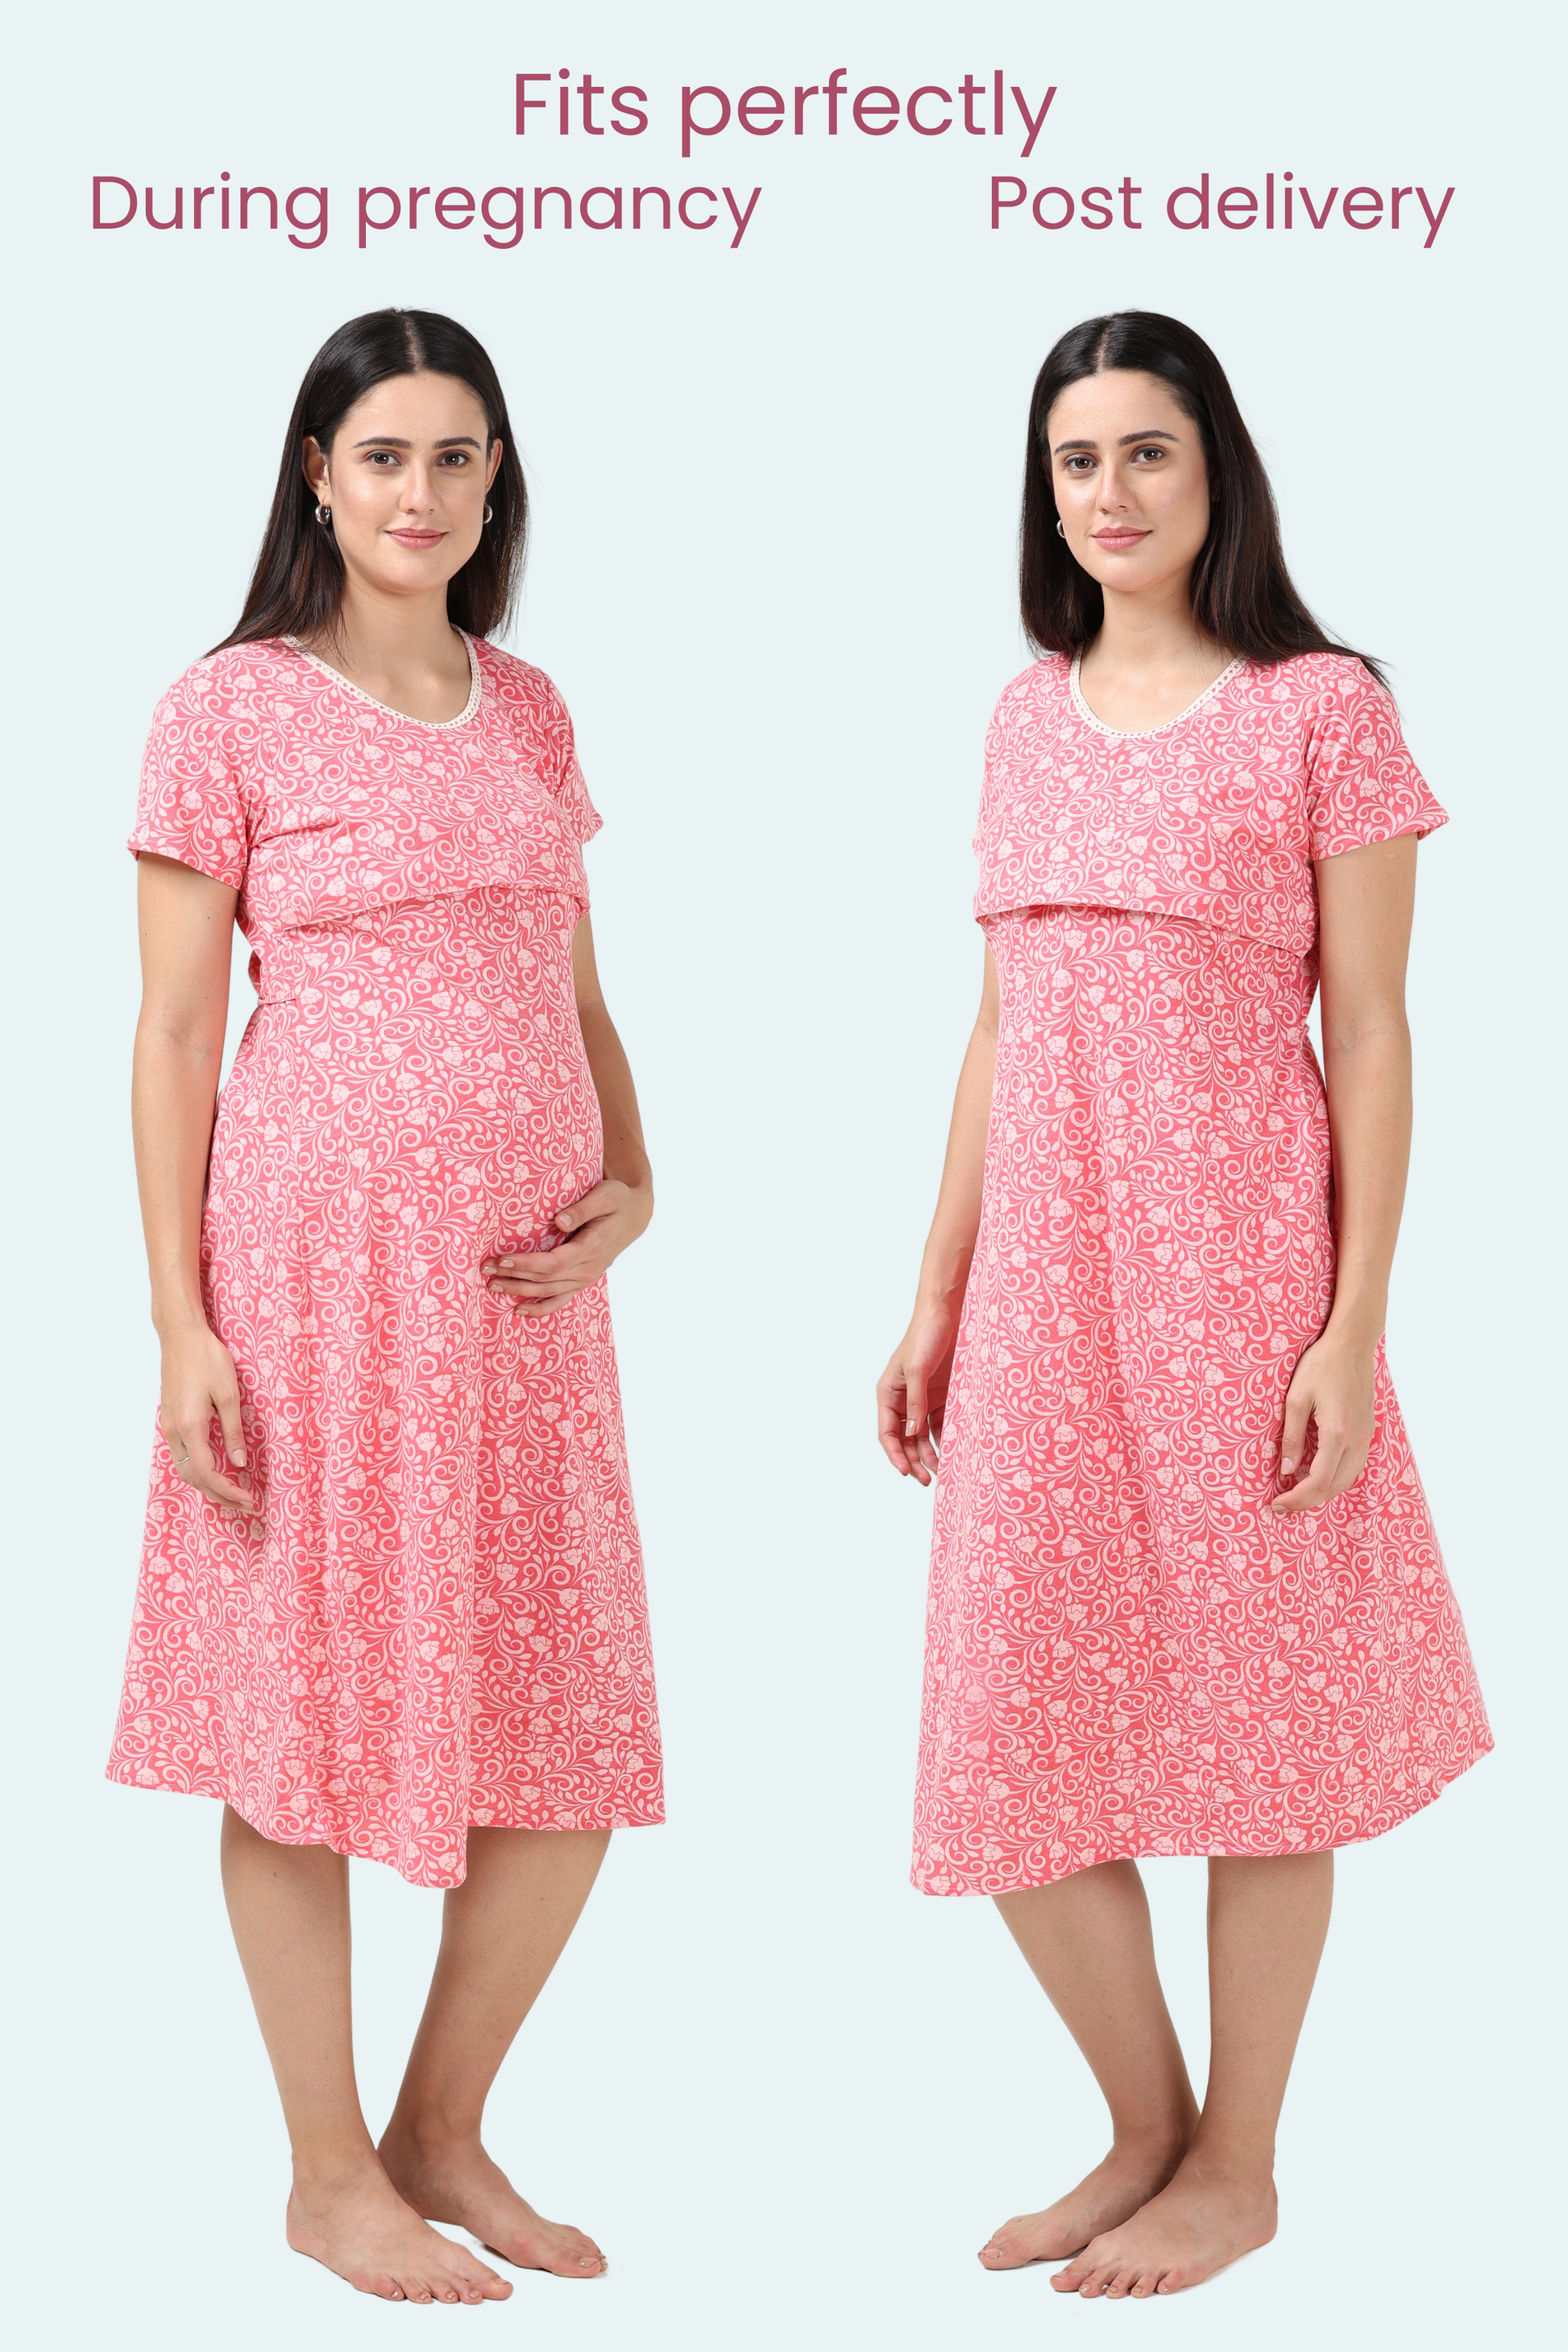 Maternity Gowns During Pregnancy & After Pregnancy